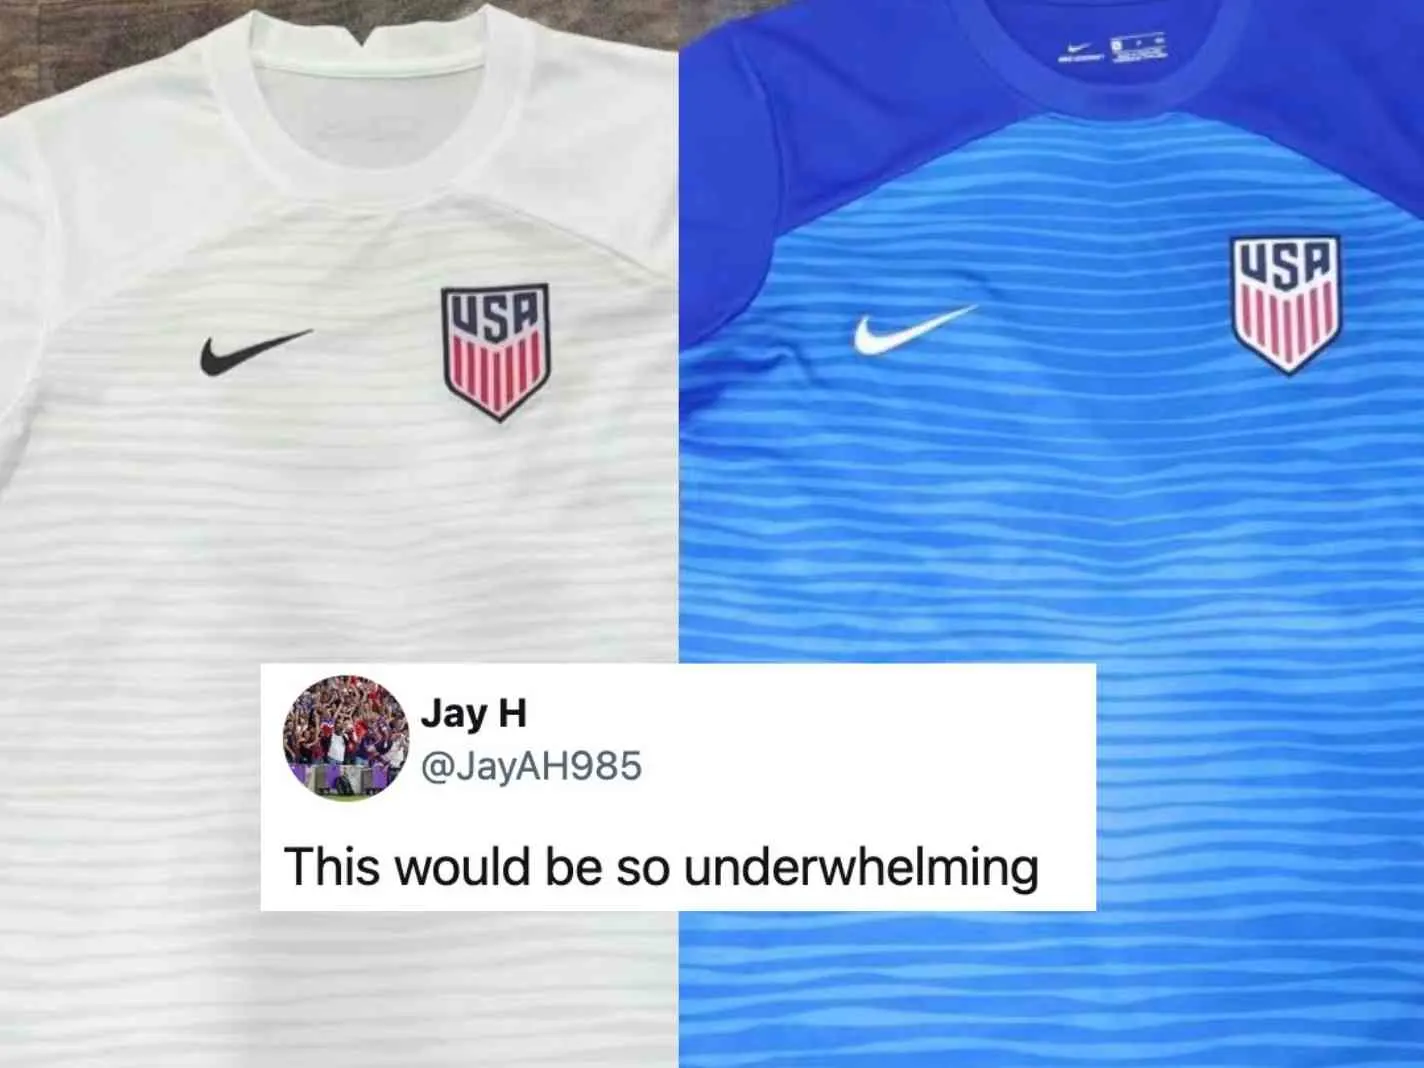 The photo shows the possible leaks of the kits USMNT will wear in the 2022 World Cup along with a Twitter reaction.